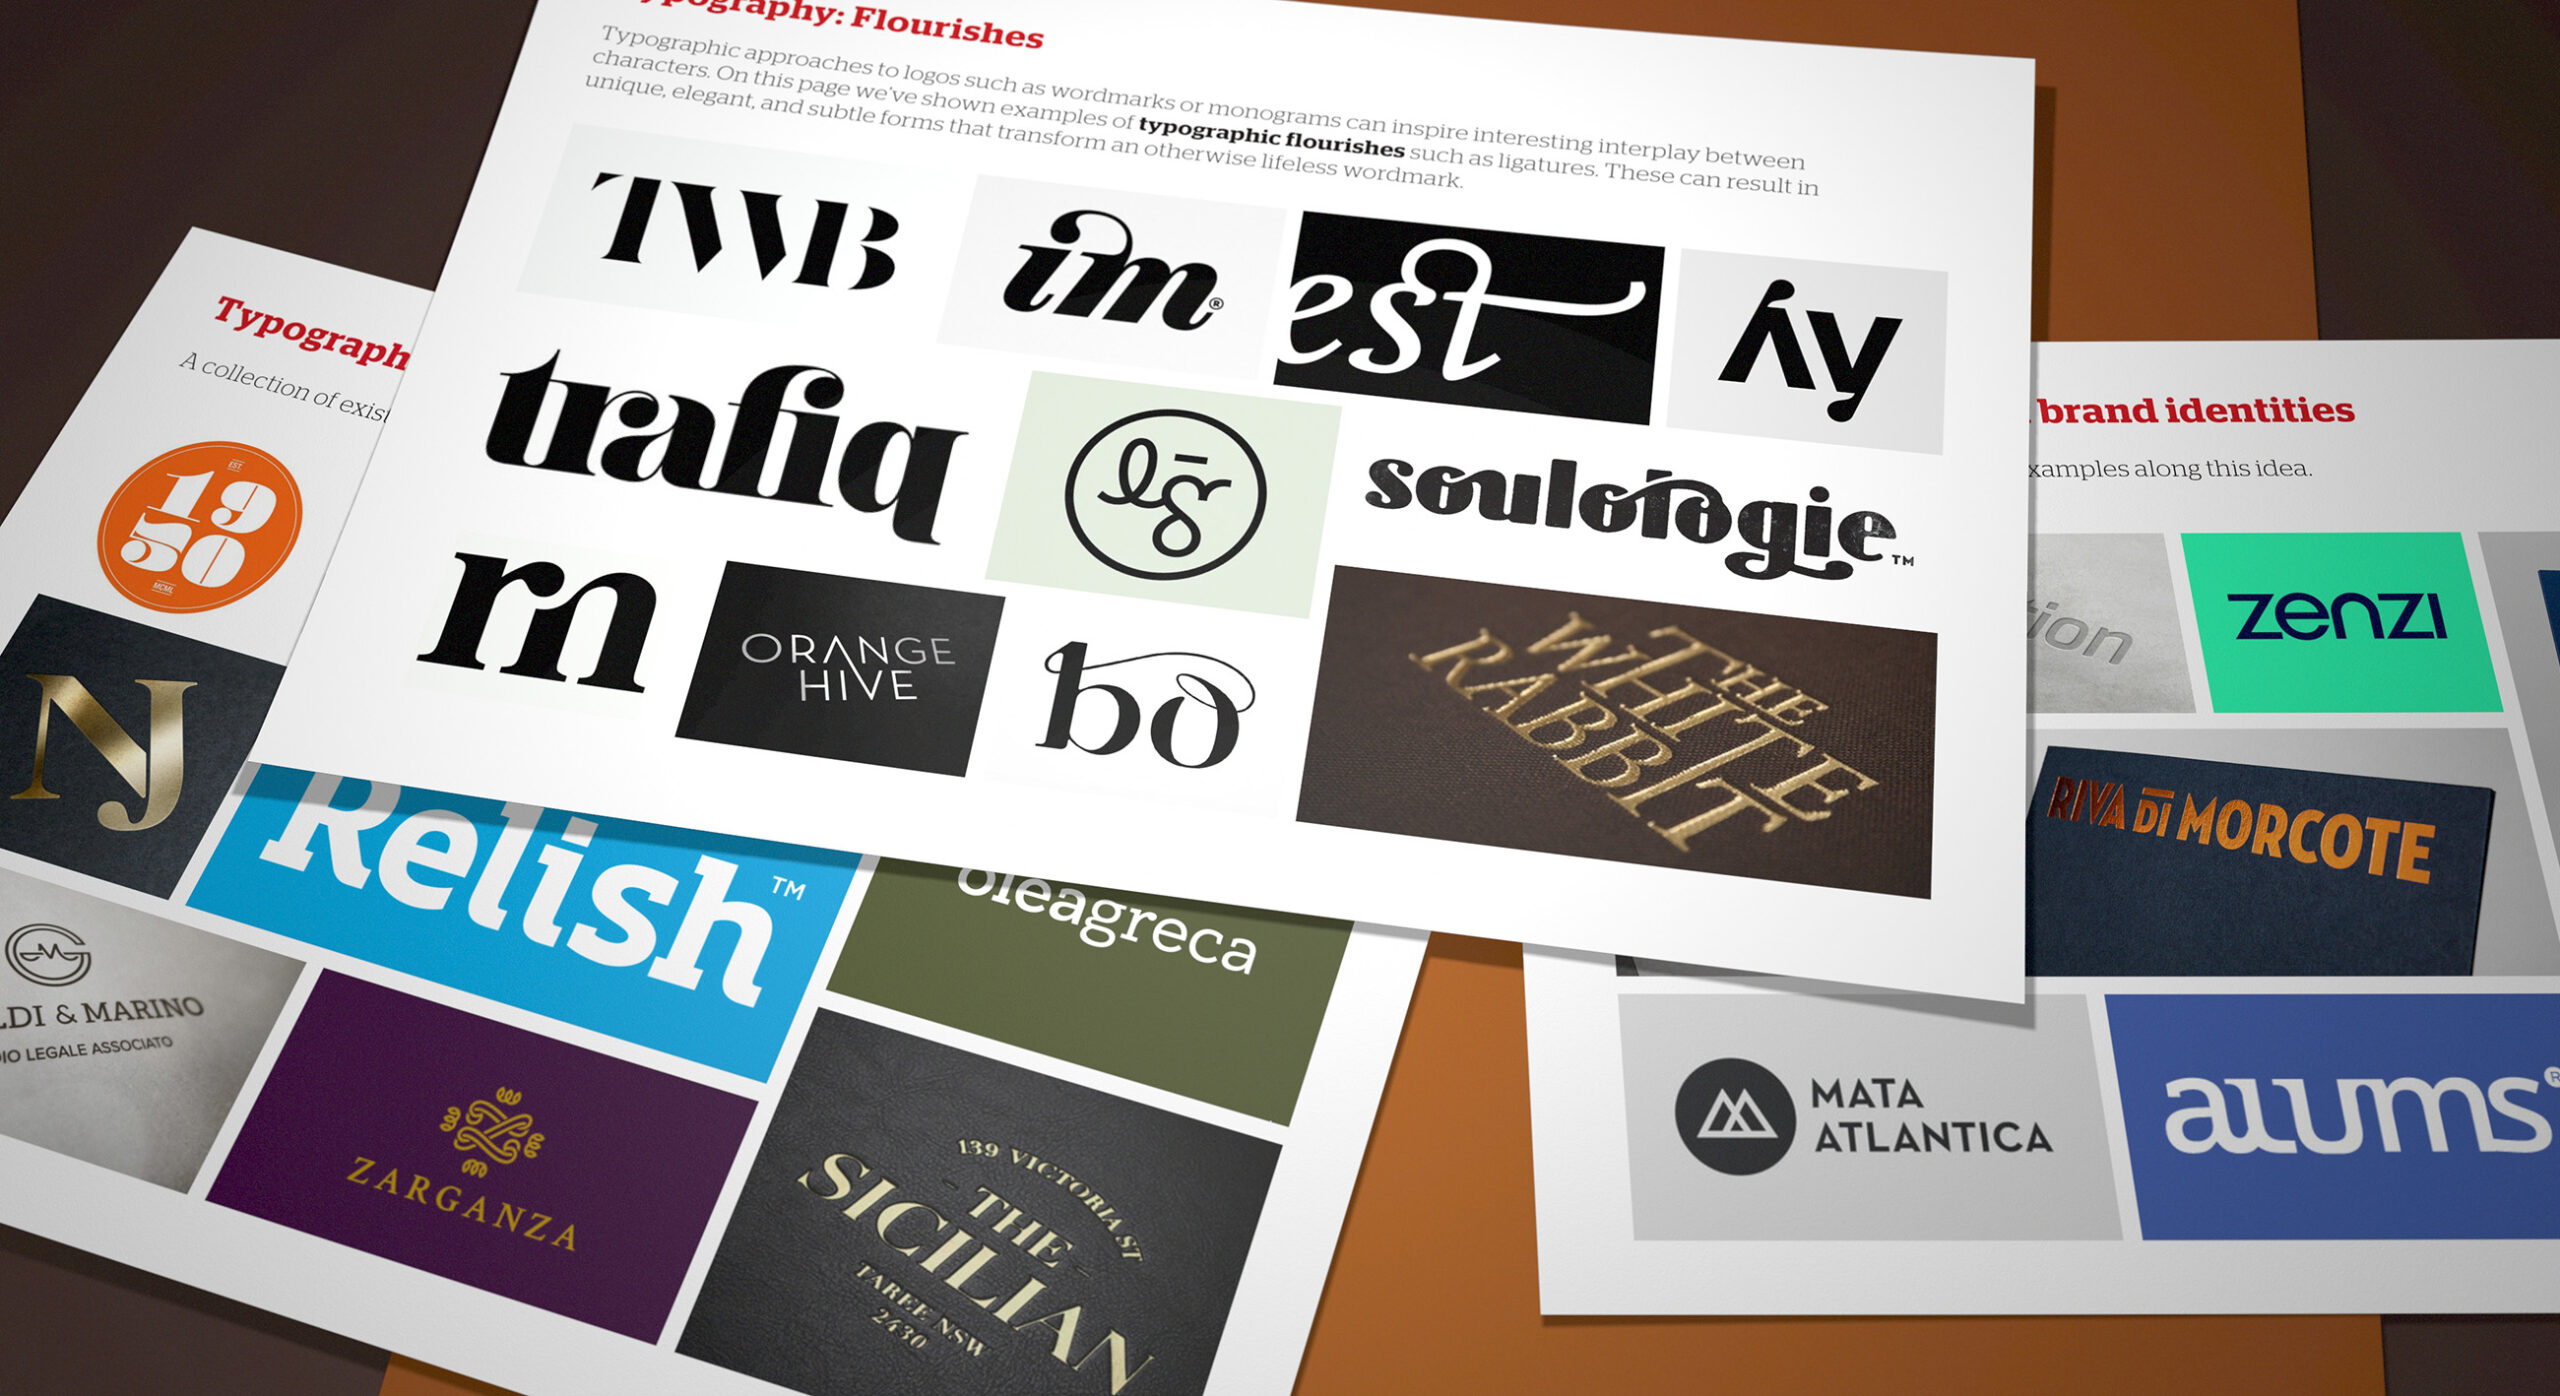 We conduct broad research of typography styles we both enjoy and feel applicable to the brand.